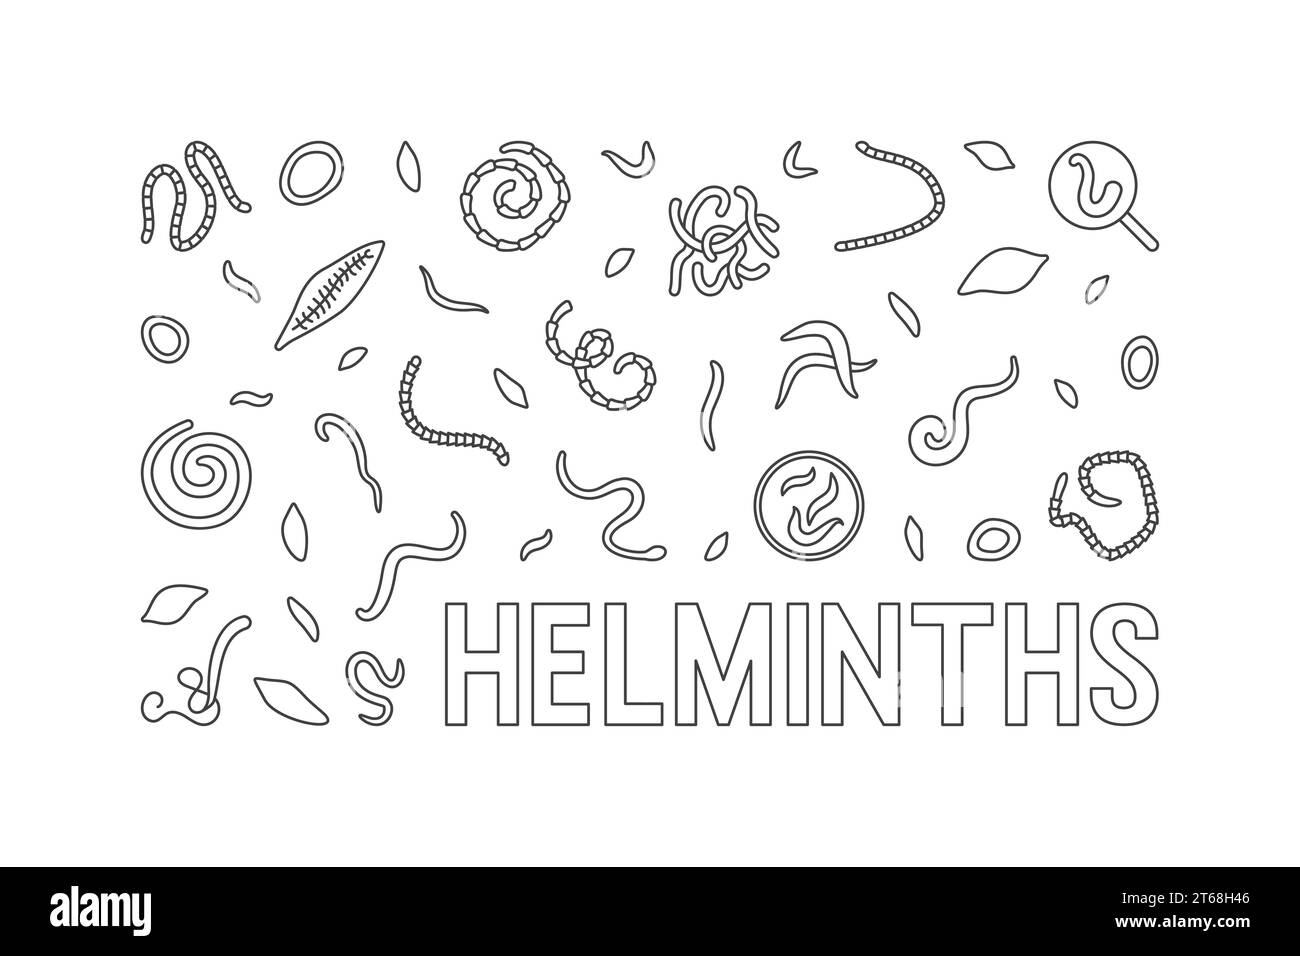 Helminths vector concept minimal horizontal illustration. Banner with Parasitic Worms outline icons Stock Vector